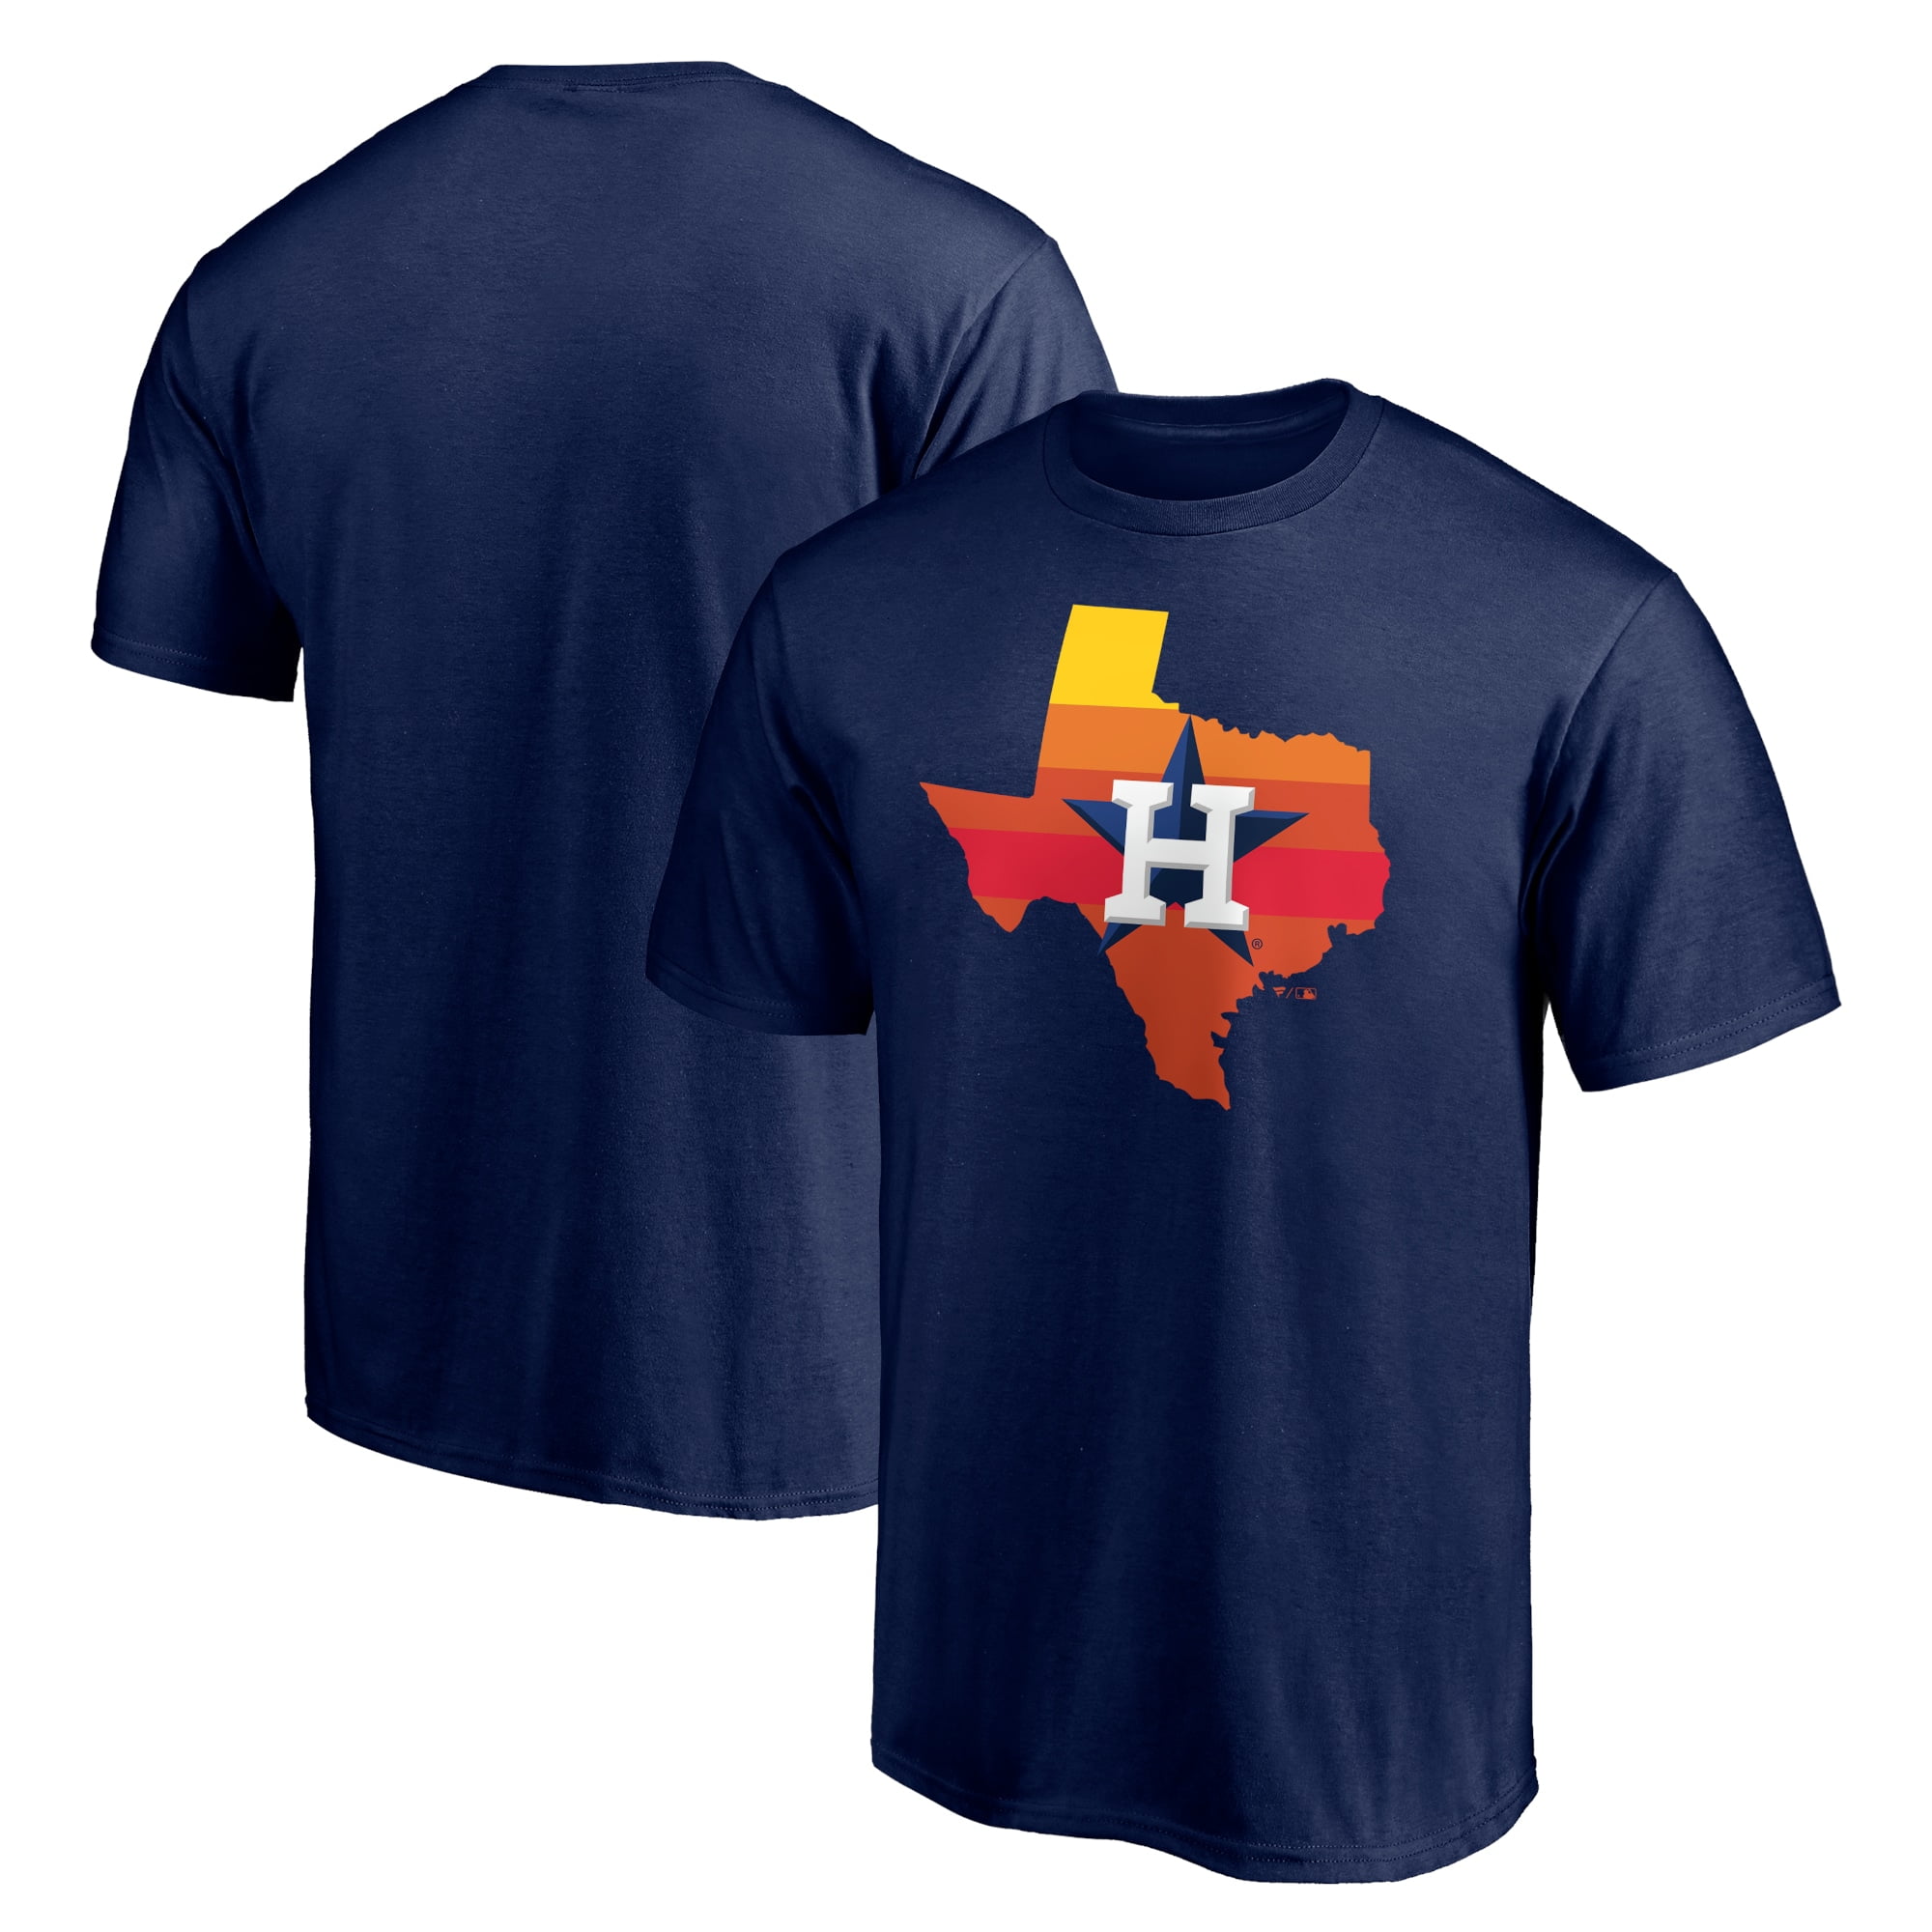 Houston Astros Stros Before Hoes Commeortaive Shirt-Orange 2017 World Series Champions Size 2XL 